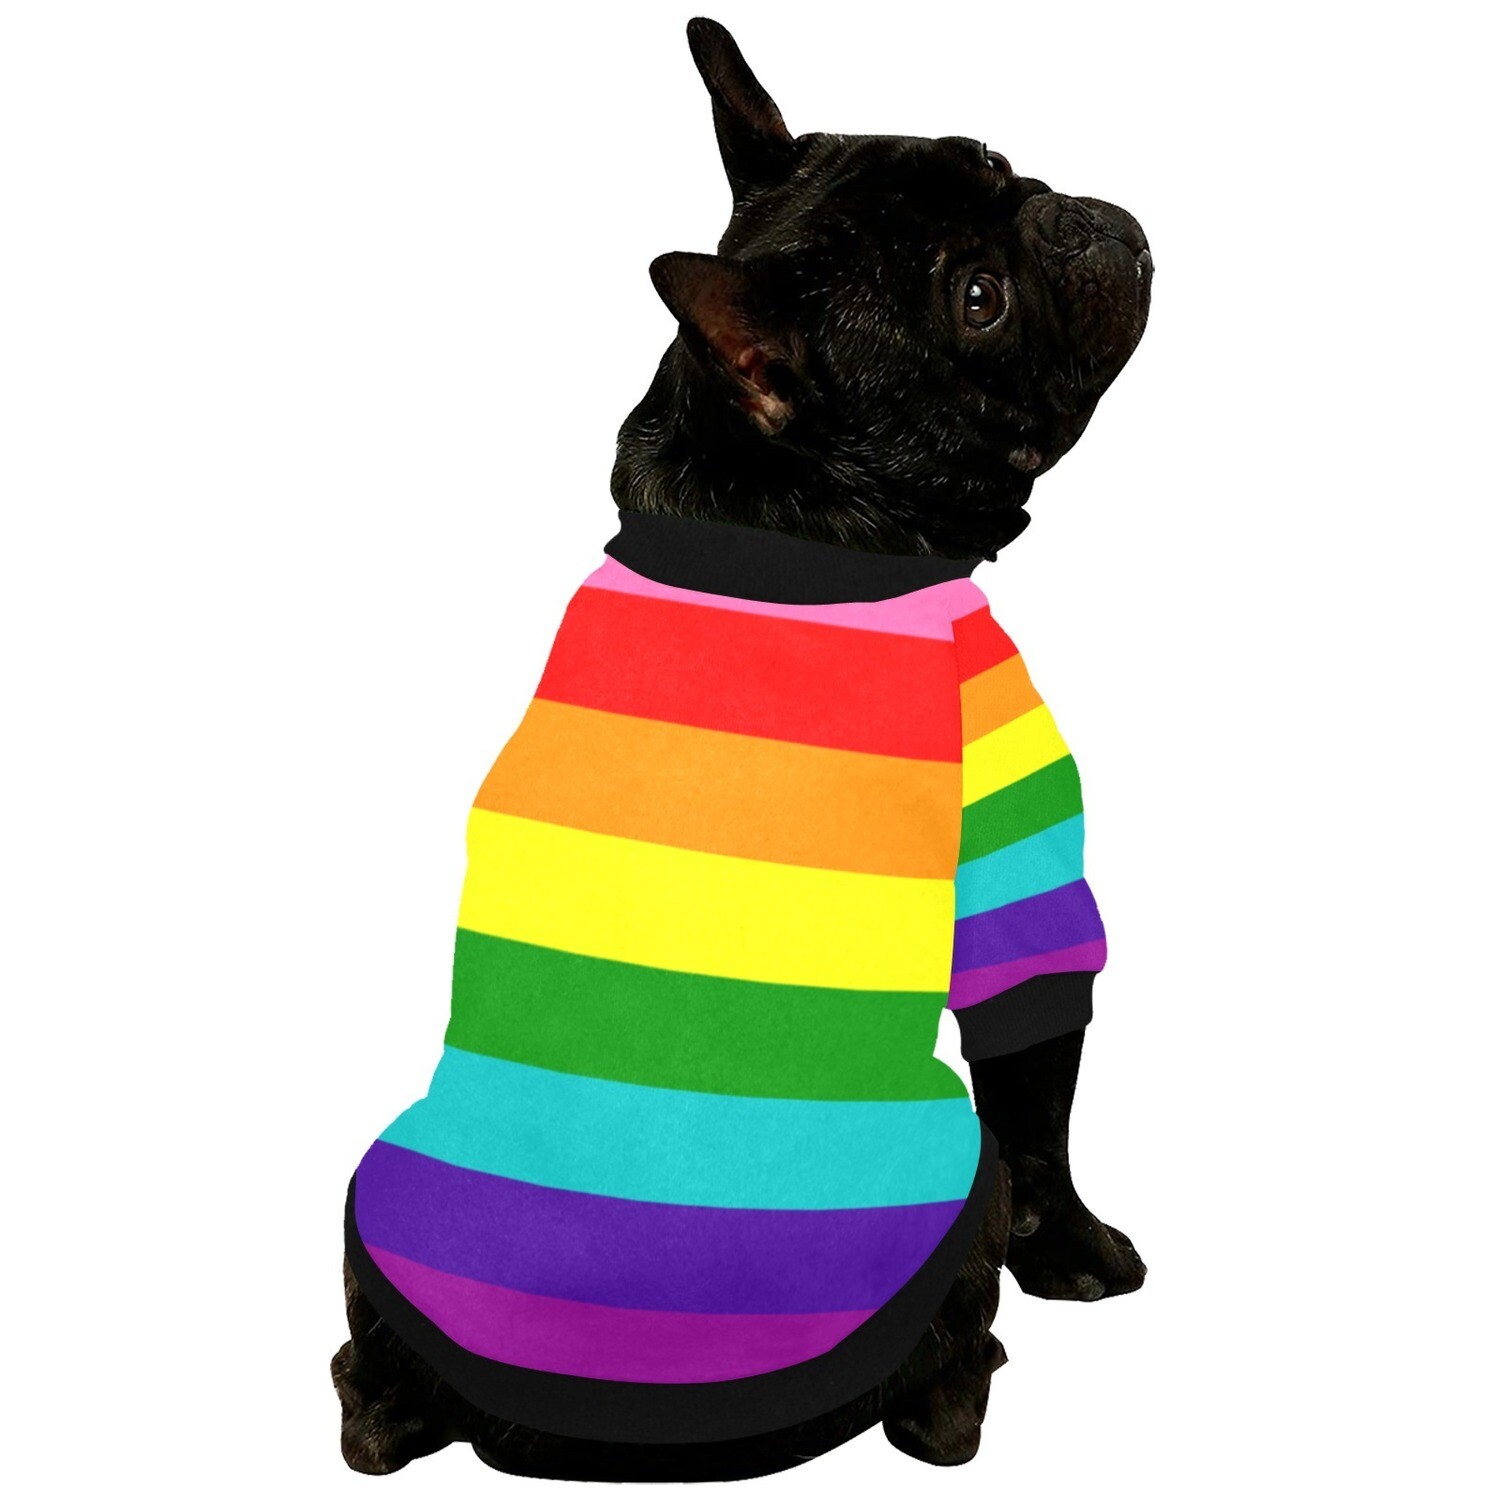 🐕🏳️‍🌈 Love is Love Buttoned Sweatshirt, dog sweater, dog clothes, Gift, 6 sizes XS to 2XL, LGBTQ, pride flag, rainbow flag, LGBT, Dog gift, Gift for dogs